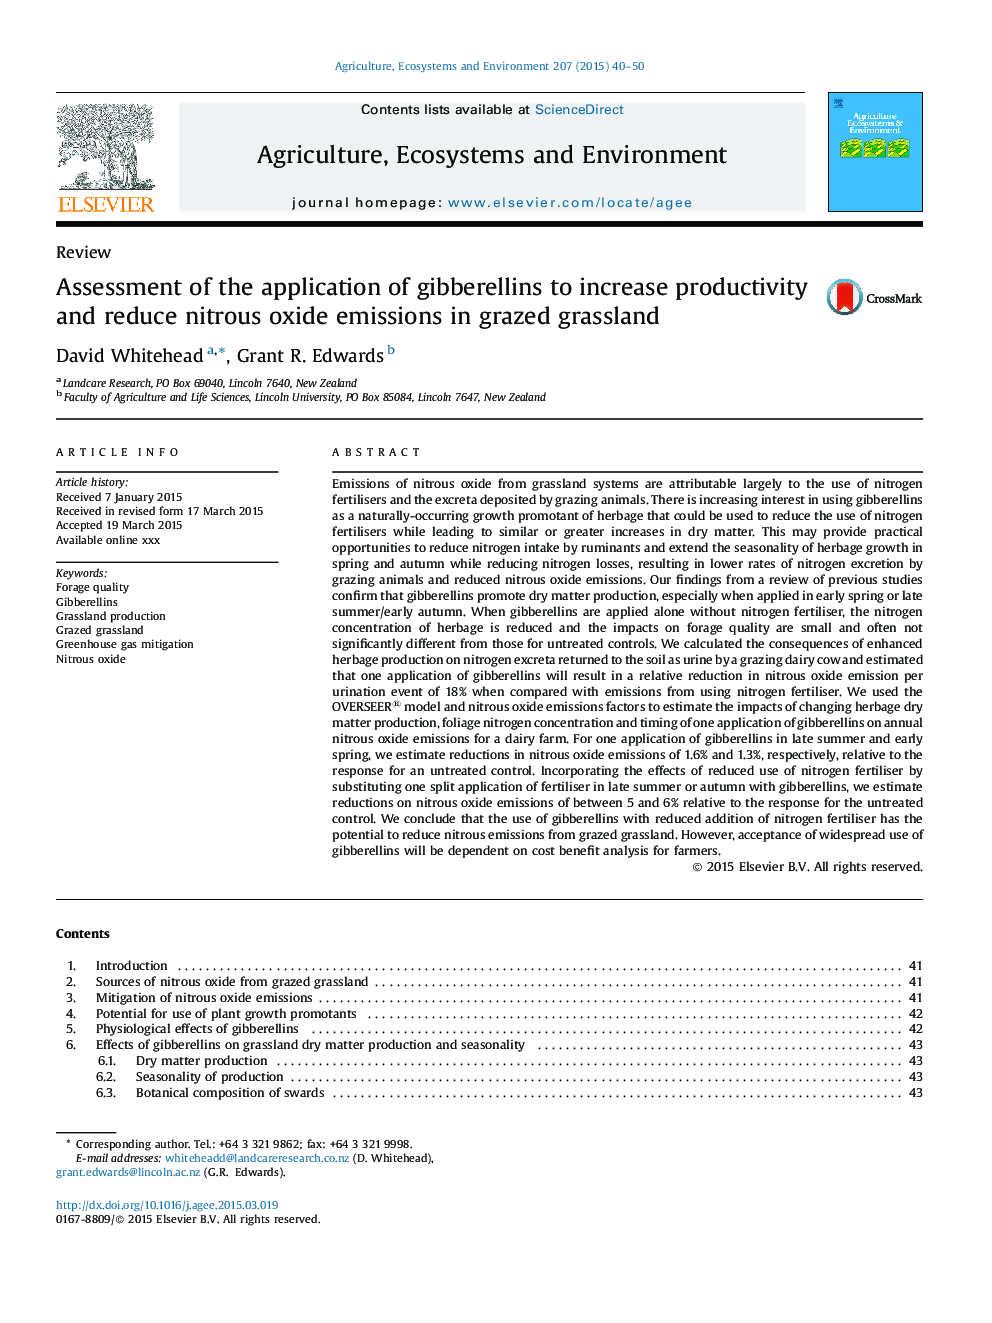 Assessment of the application of gibberellins to increase productivity and reduce nitrous oxide emissions in grazed grassland